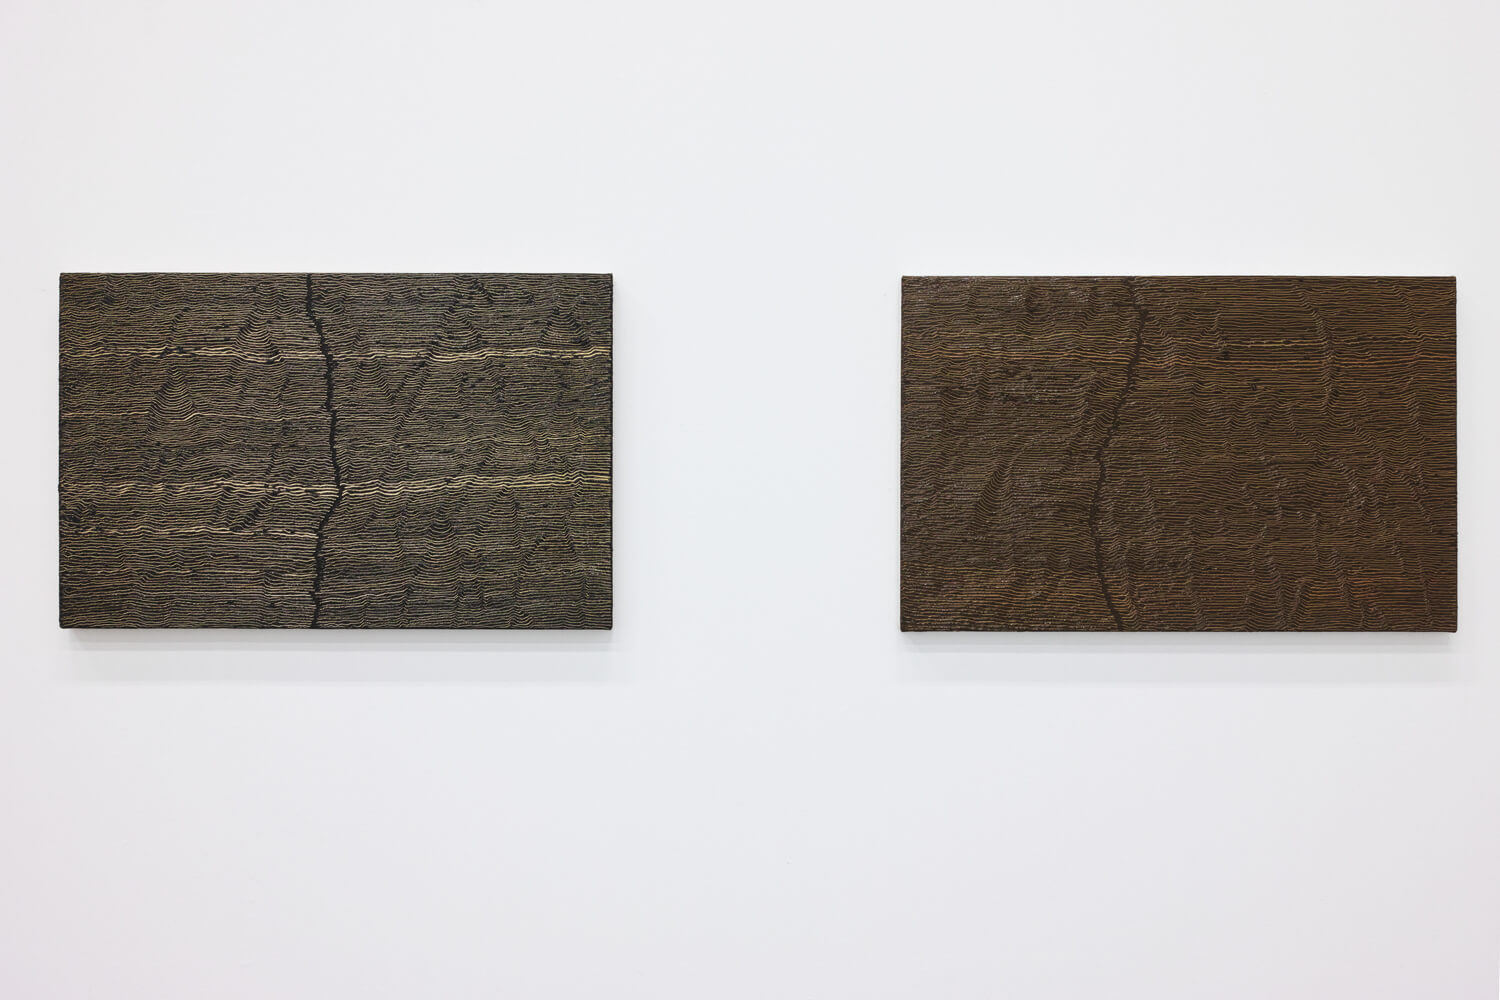 'Fissure 8'  (left) $ 'Fissure 2' (right)<br>Oil and Amber on canvas over panel, 33.7 x 53.4 cm, 2001 each